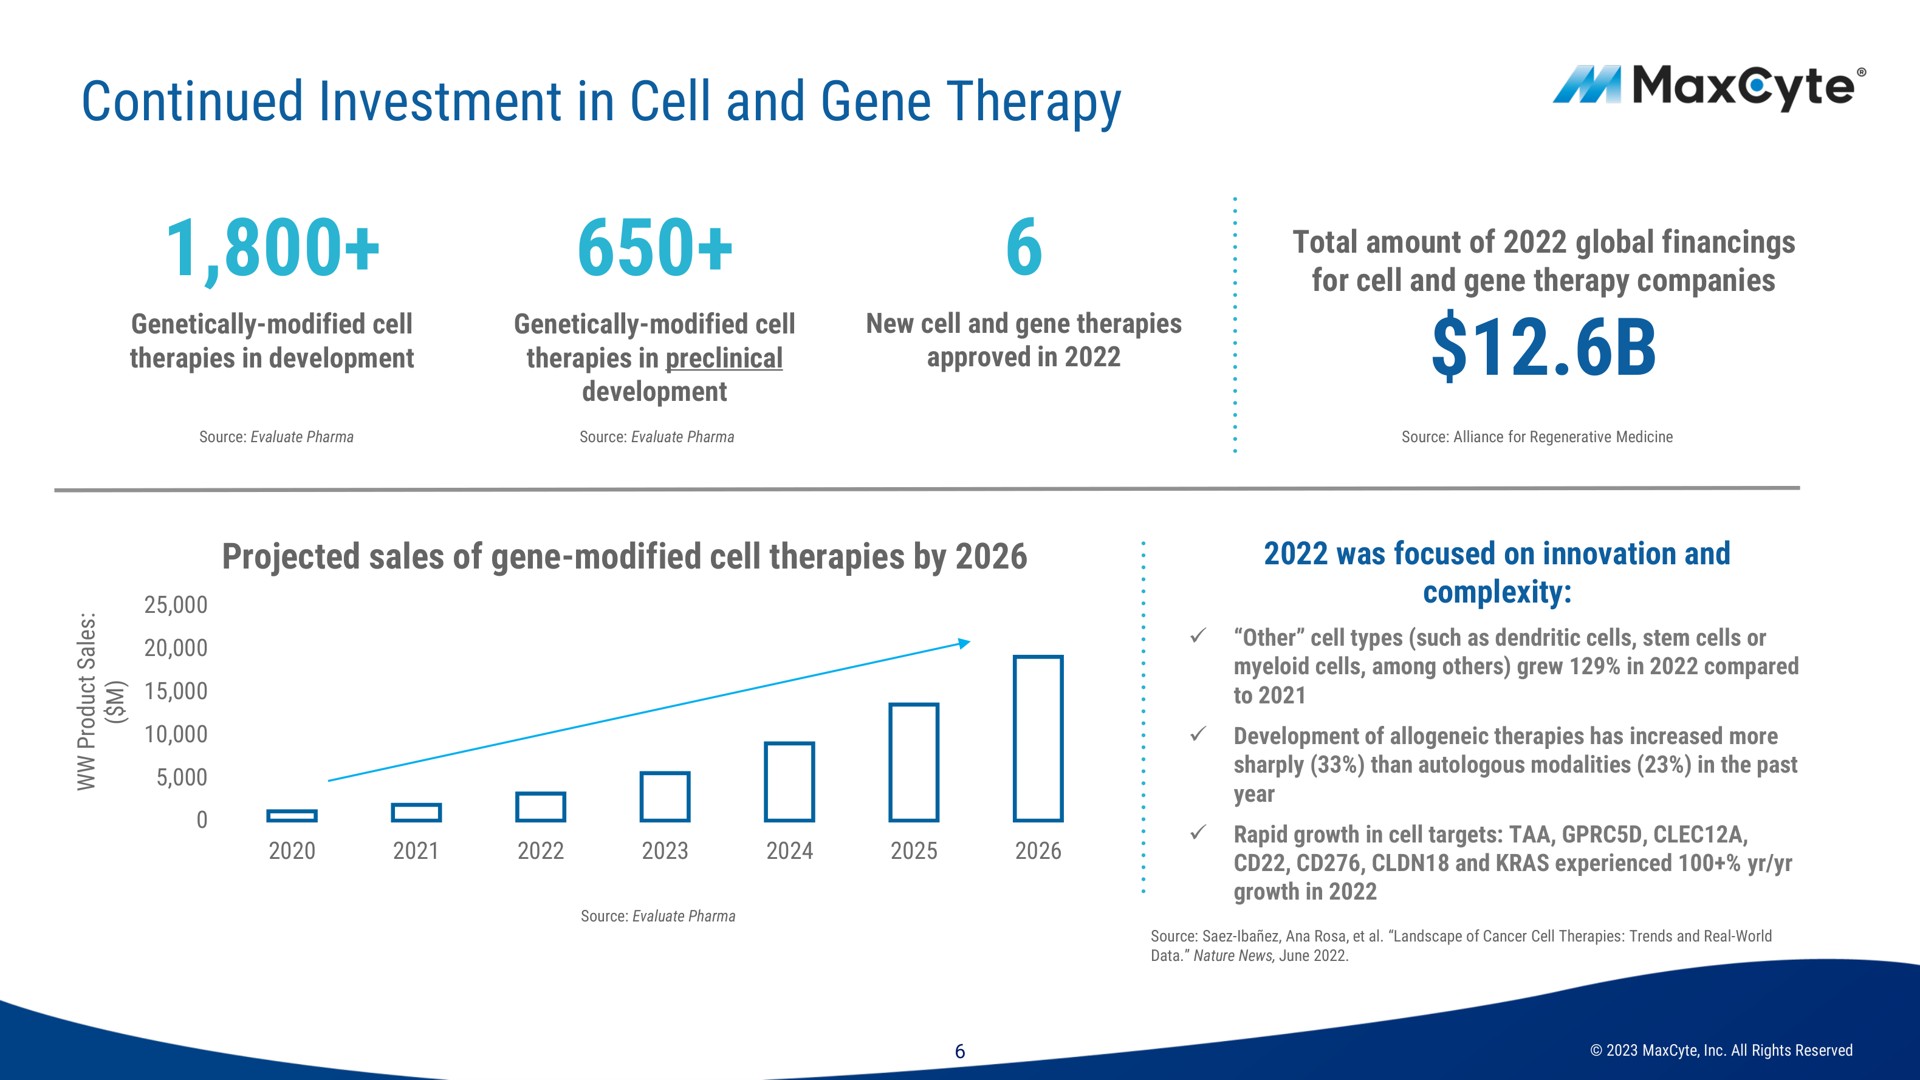 continued investment in cell and gene therapy i total global financings | MaxCyte